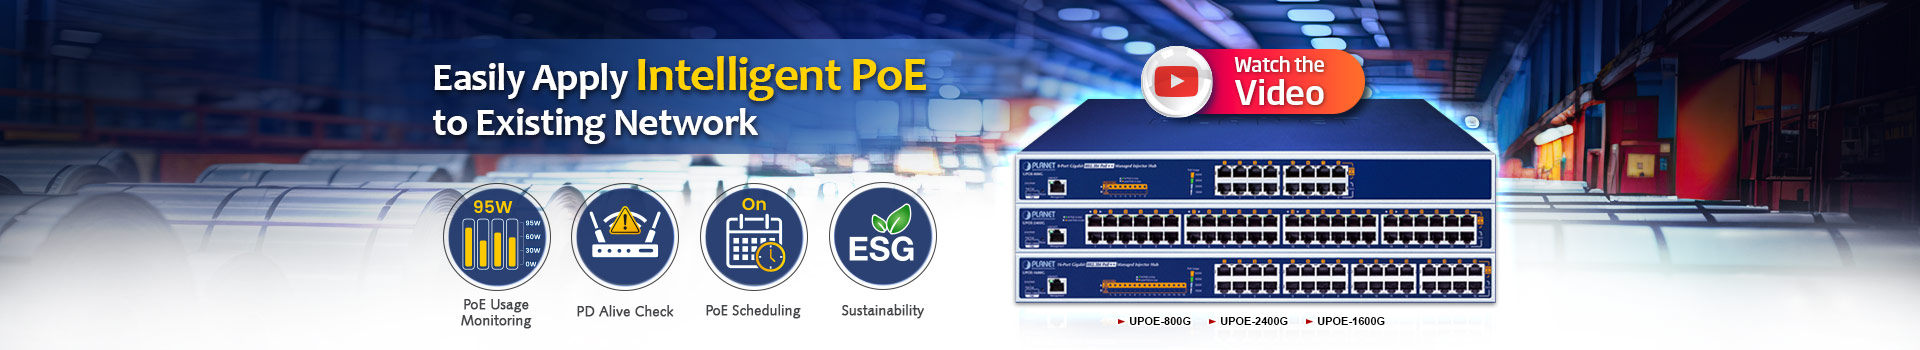 Easily Apply Intelligent PoE to Existing Network